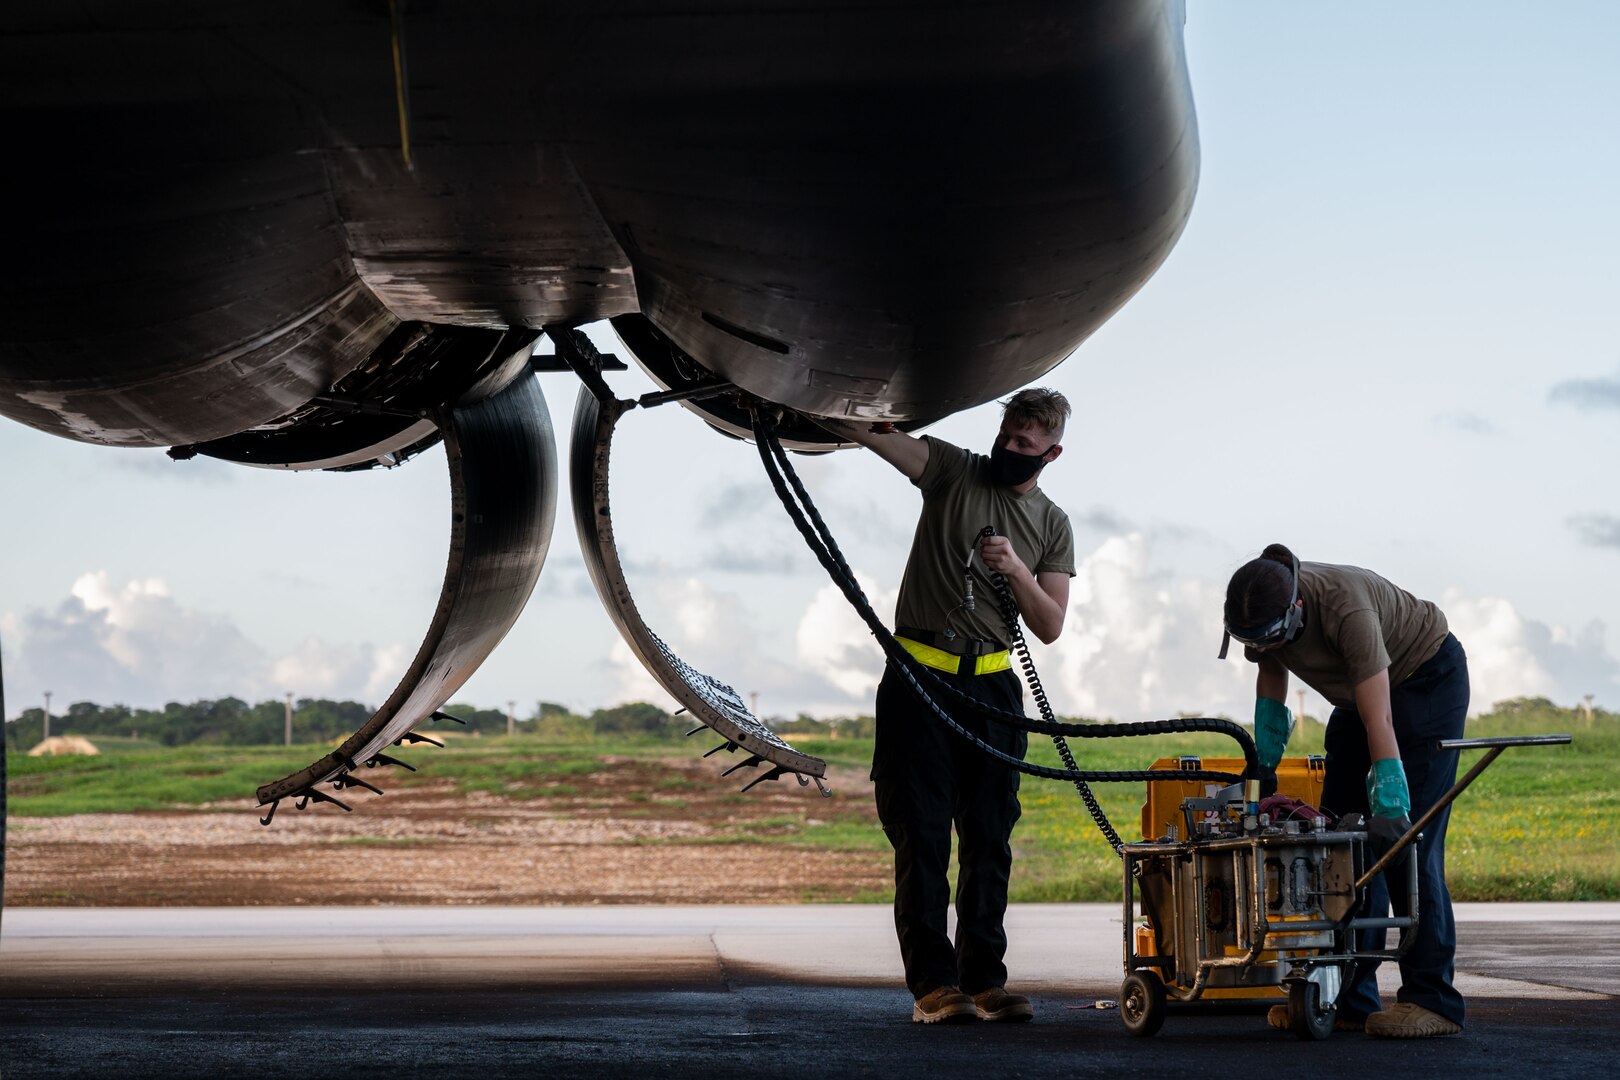 Airmen deployed from Ellsworth Air Force Base, S.D., for Bomber Task Force operations conduct a post-flight inspection on a U.S. Air Force B-1B Lancer at Andersen Air Force Base, Guam, Dec. 12, 2020. More than 150 Airmen and four B-1B Lancers assigned to the 37th Expeditionary Bomb Squadron out of Ellsworth AFB, S.D., deployed to the Pacific in support of BTF dynamic force employment. This empowers a small but agile footprint of maintenance personnel to generate airpower at locations across the globe. (U.S. Air Force photo by Senior Airman Tristan Day)